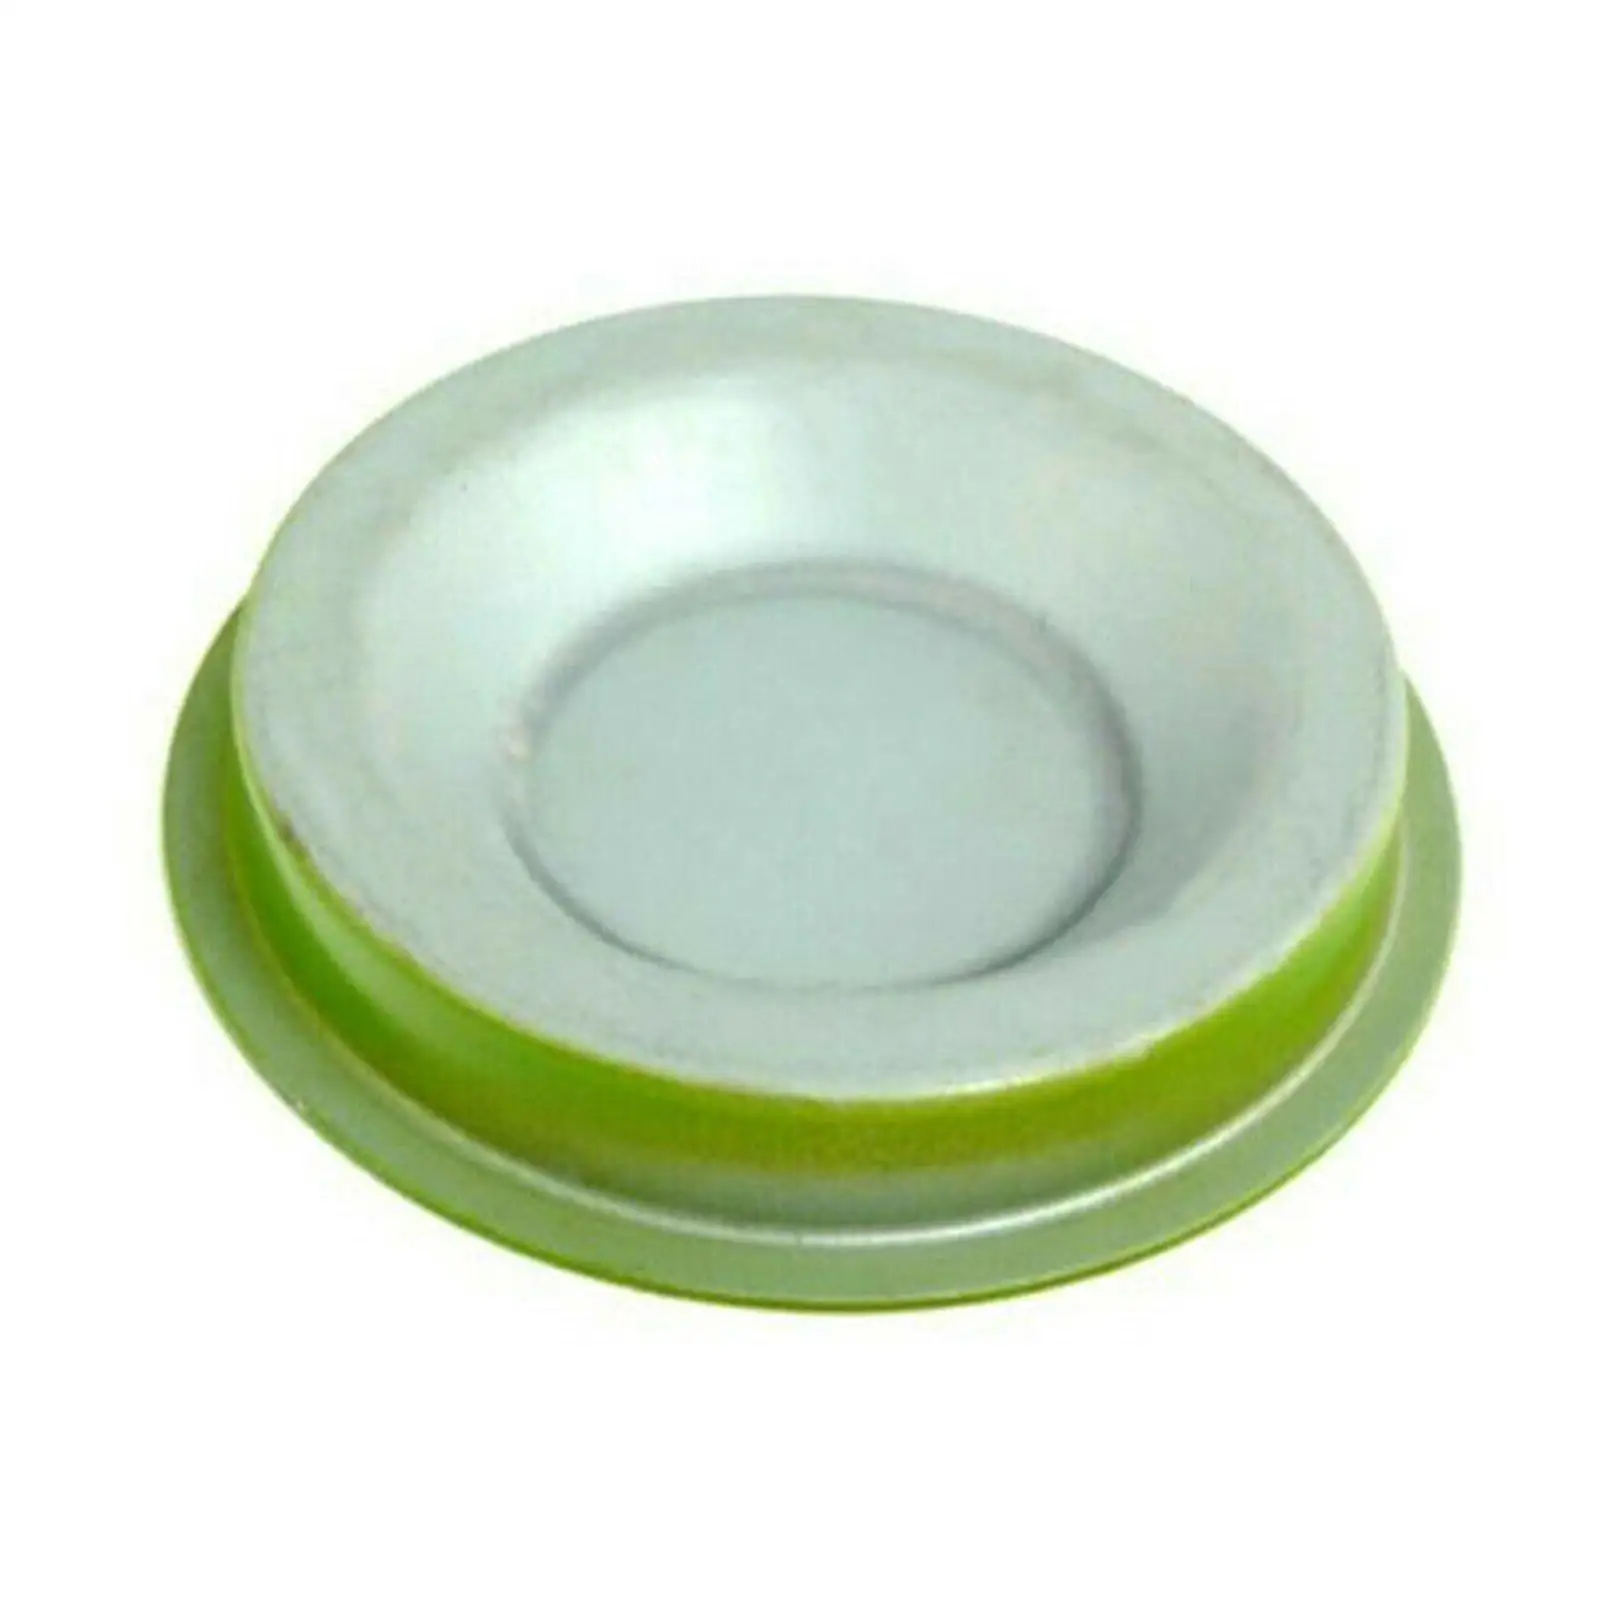 Car Gearbox End Cover 020141073A Automobile Accessory Durable Diameter 9cm Easily Install Green color